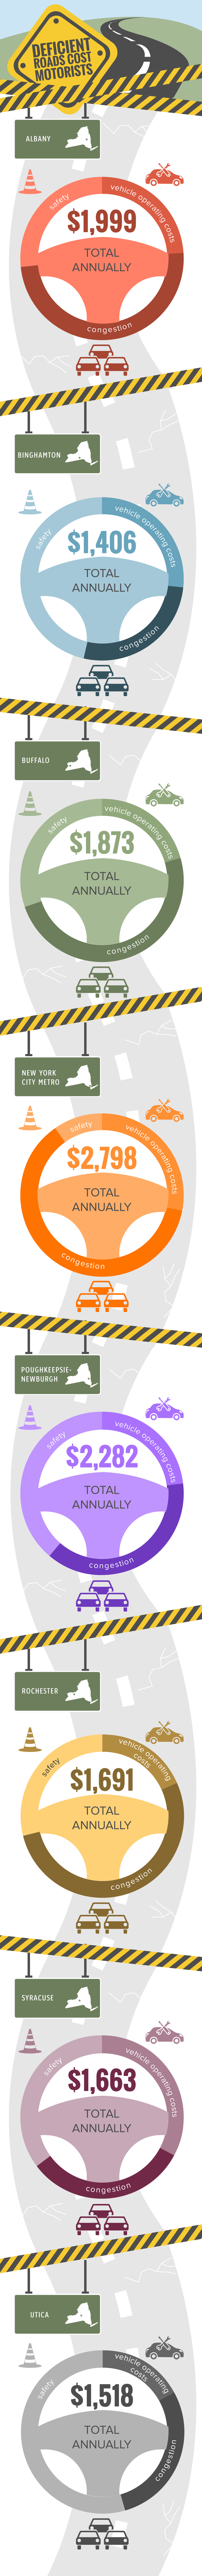 New York State Deficient Roads Infographic By Locality